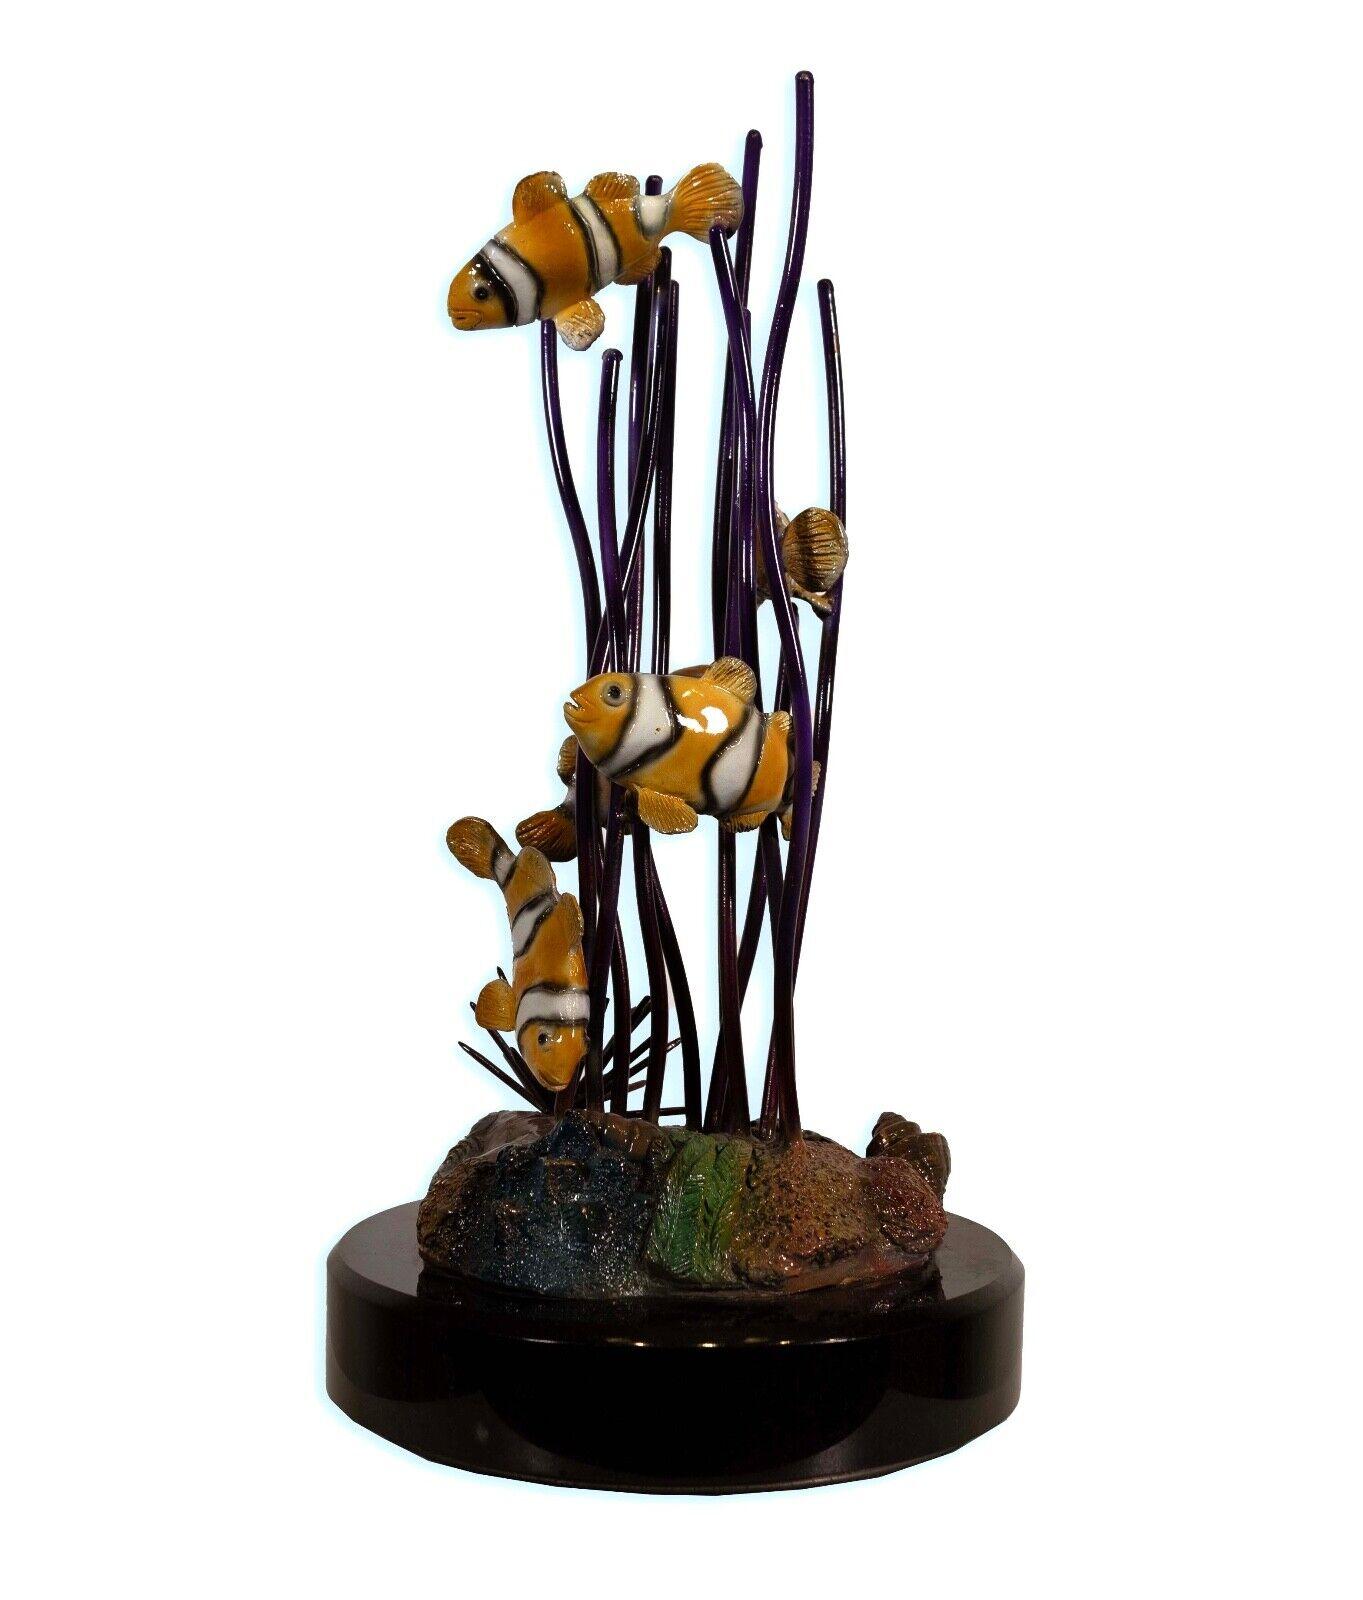 This sculpture by J. Townsend, numbered 7/399, presents a playful scene of clownfish among coral, crafted from a combination of bronze and ceramic. The fish are depicted with a high level of detail, their stripes and contours meticulously rendered,